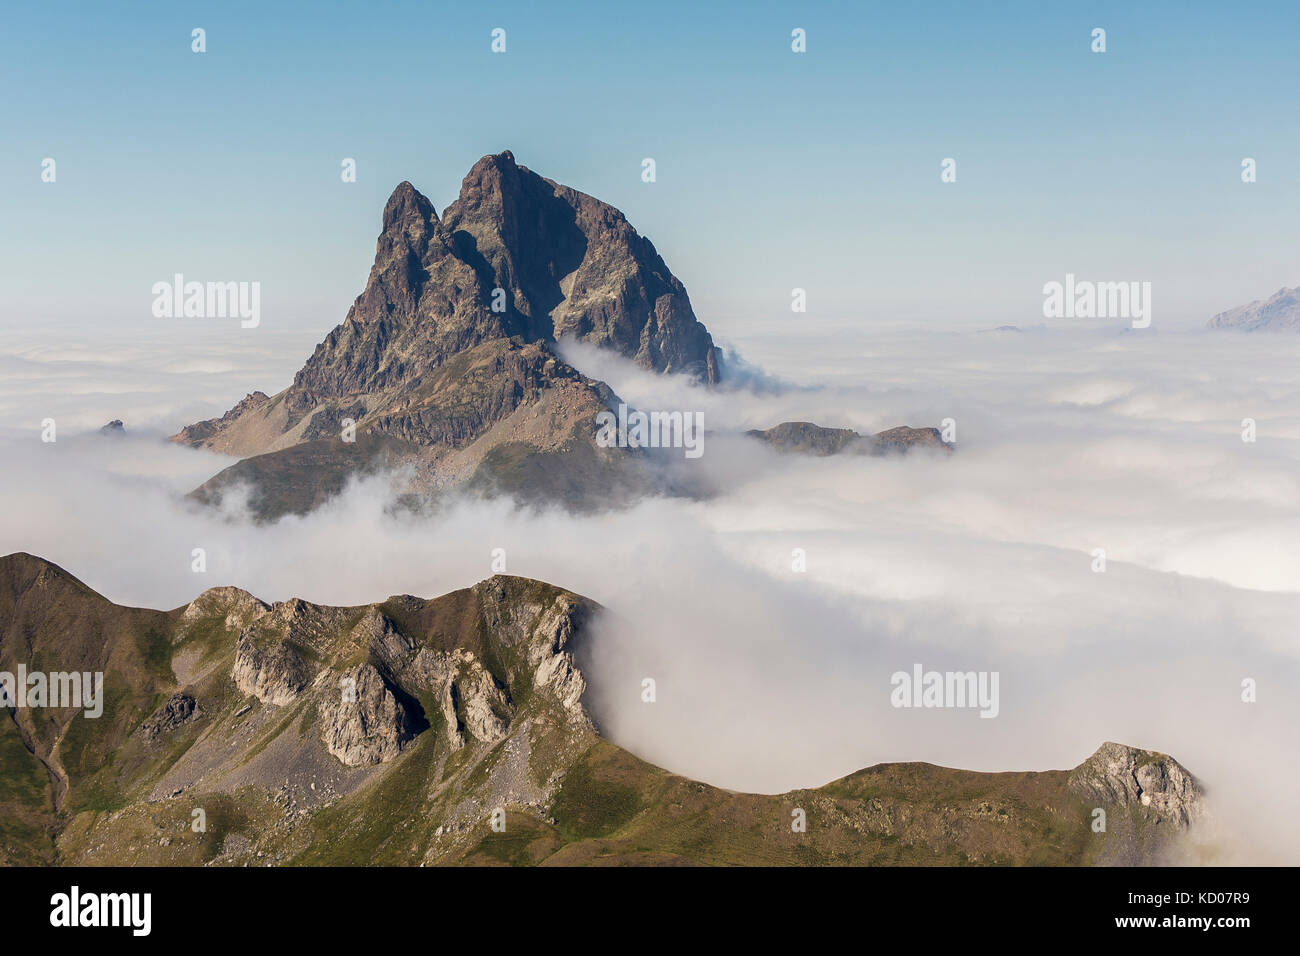 View of Midi d'Ossau, France Stock Photo